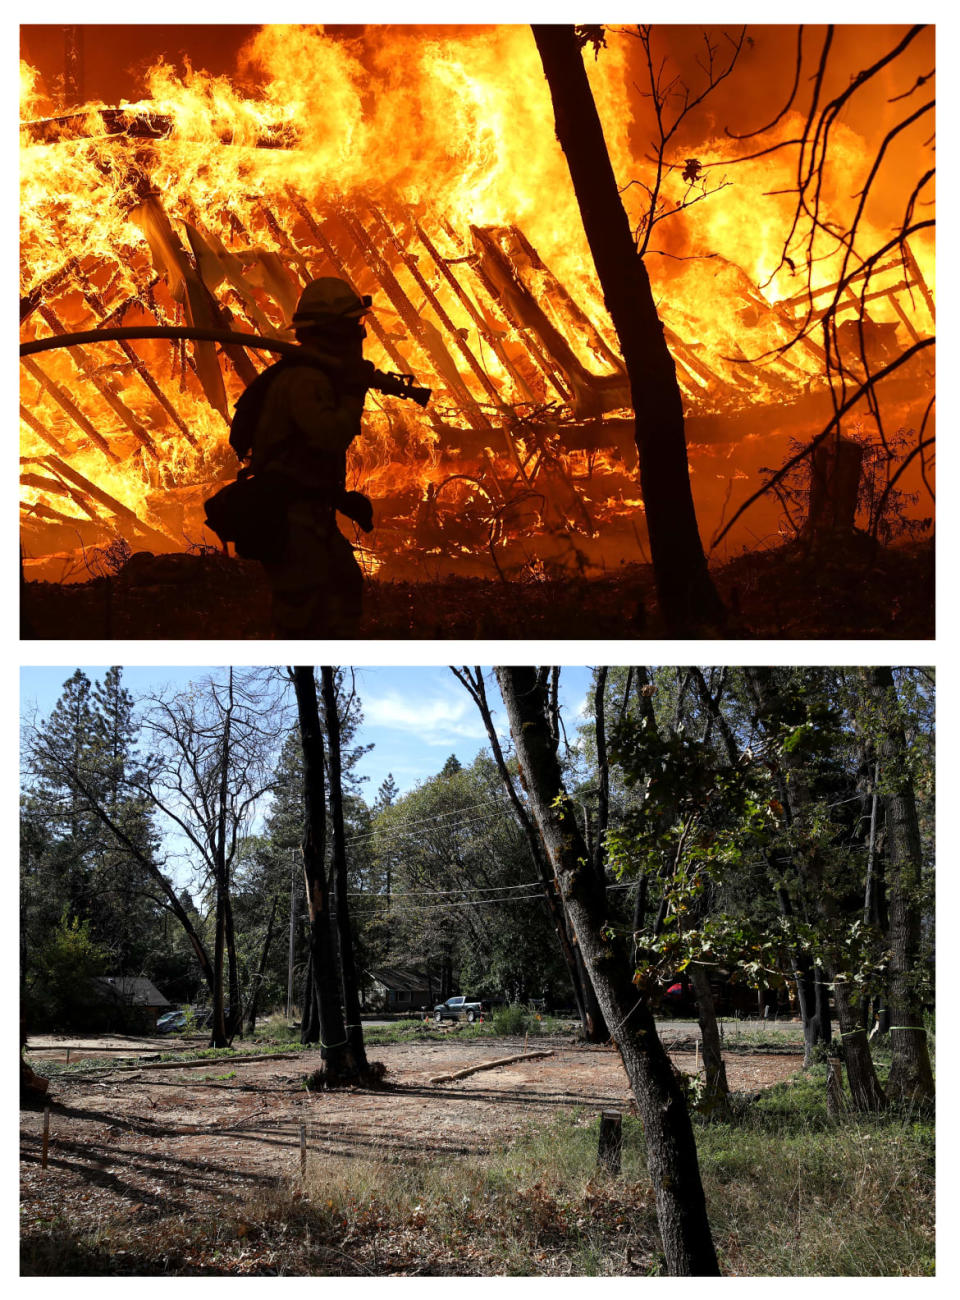 <div class="inline-image__caption"><p>Top: A Cal Fire firefighter monitors a burning home as the Camp Fire moves through the area on November 9, 2018 in Magalia, California. </p><p>Bottom: An October 21, 2019 view of a lot where that same home burned down.</p></div> <div class="inline-image__credit">Justin Sullivan / Getty</div>